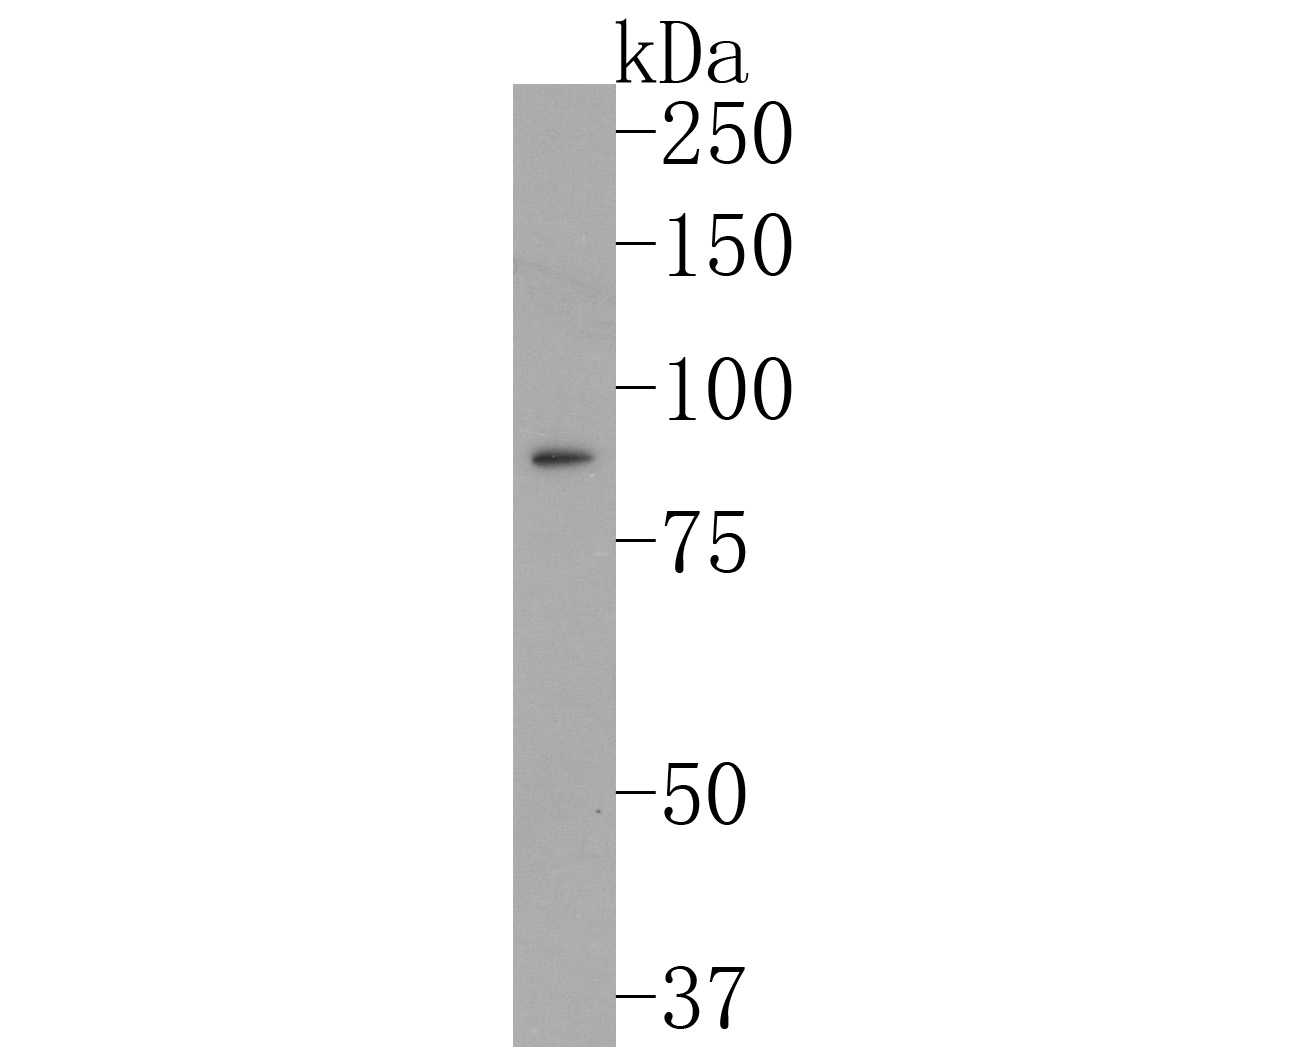 Western blot analysis of GOLPH2 on 293T cell lysates. Proteins were transferred to a PVDF membrane and blocked with 5% BSA in PBS for 1 hour at room temperature. The primary antibody (ET1704-64, 1/500) was used in 5% BSA at room temperature for 2 hours. Goat Anti-Rabbit IgG - HRP Secondary Antibody (HA1001) at 1:200,000 dilution was used for 1 hour at room temperature.